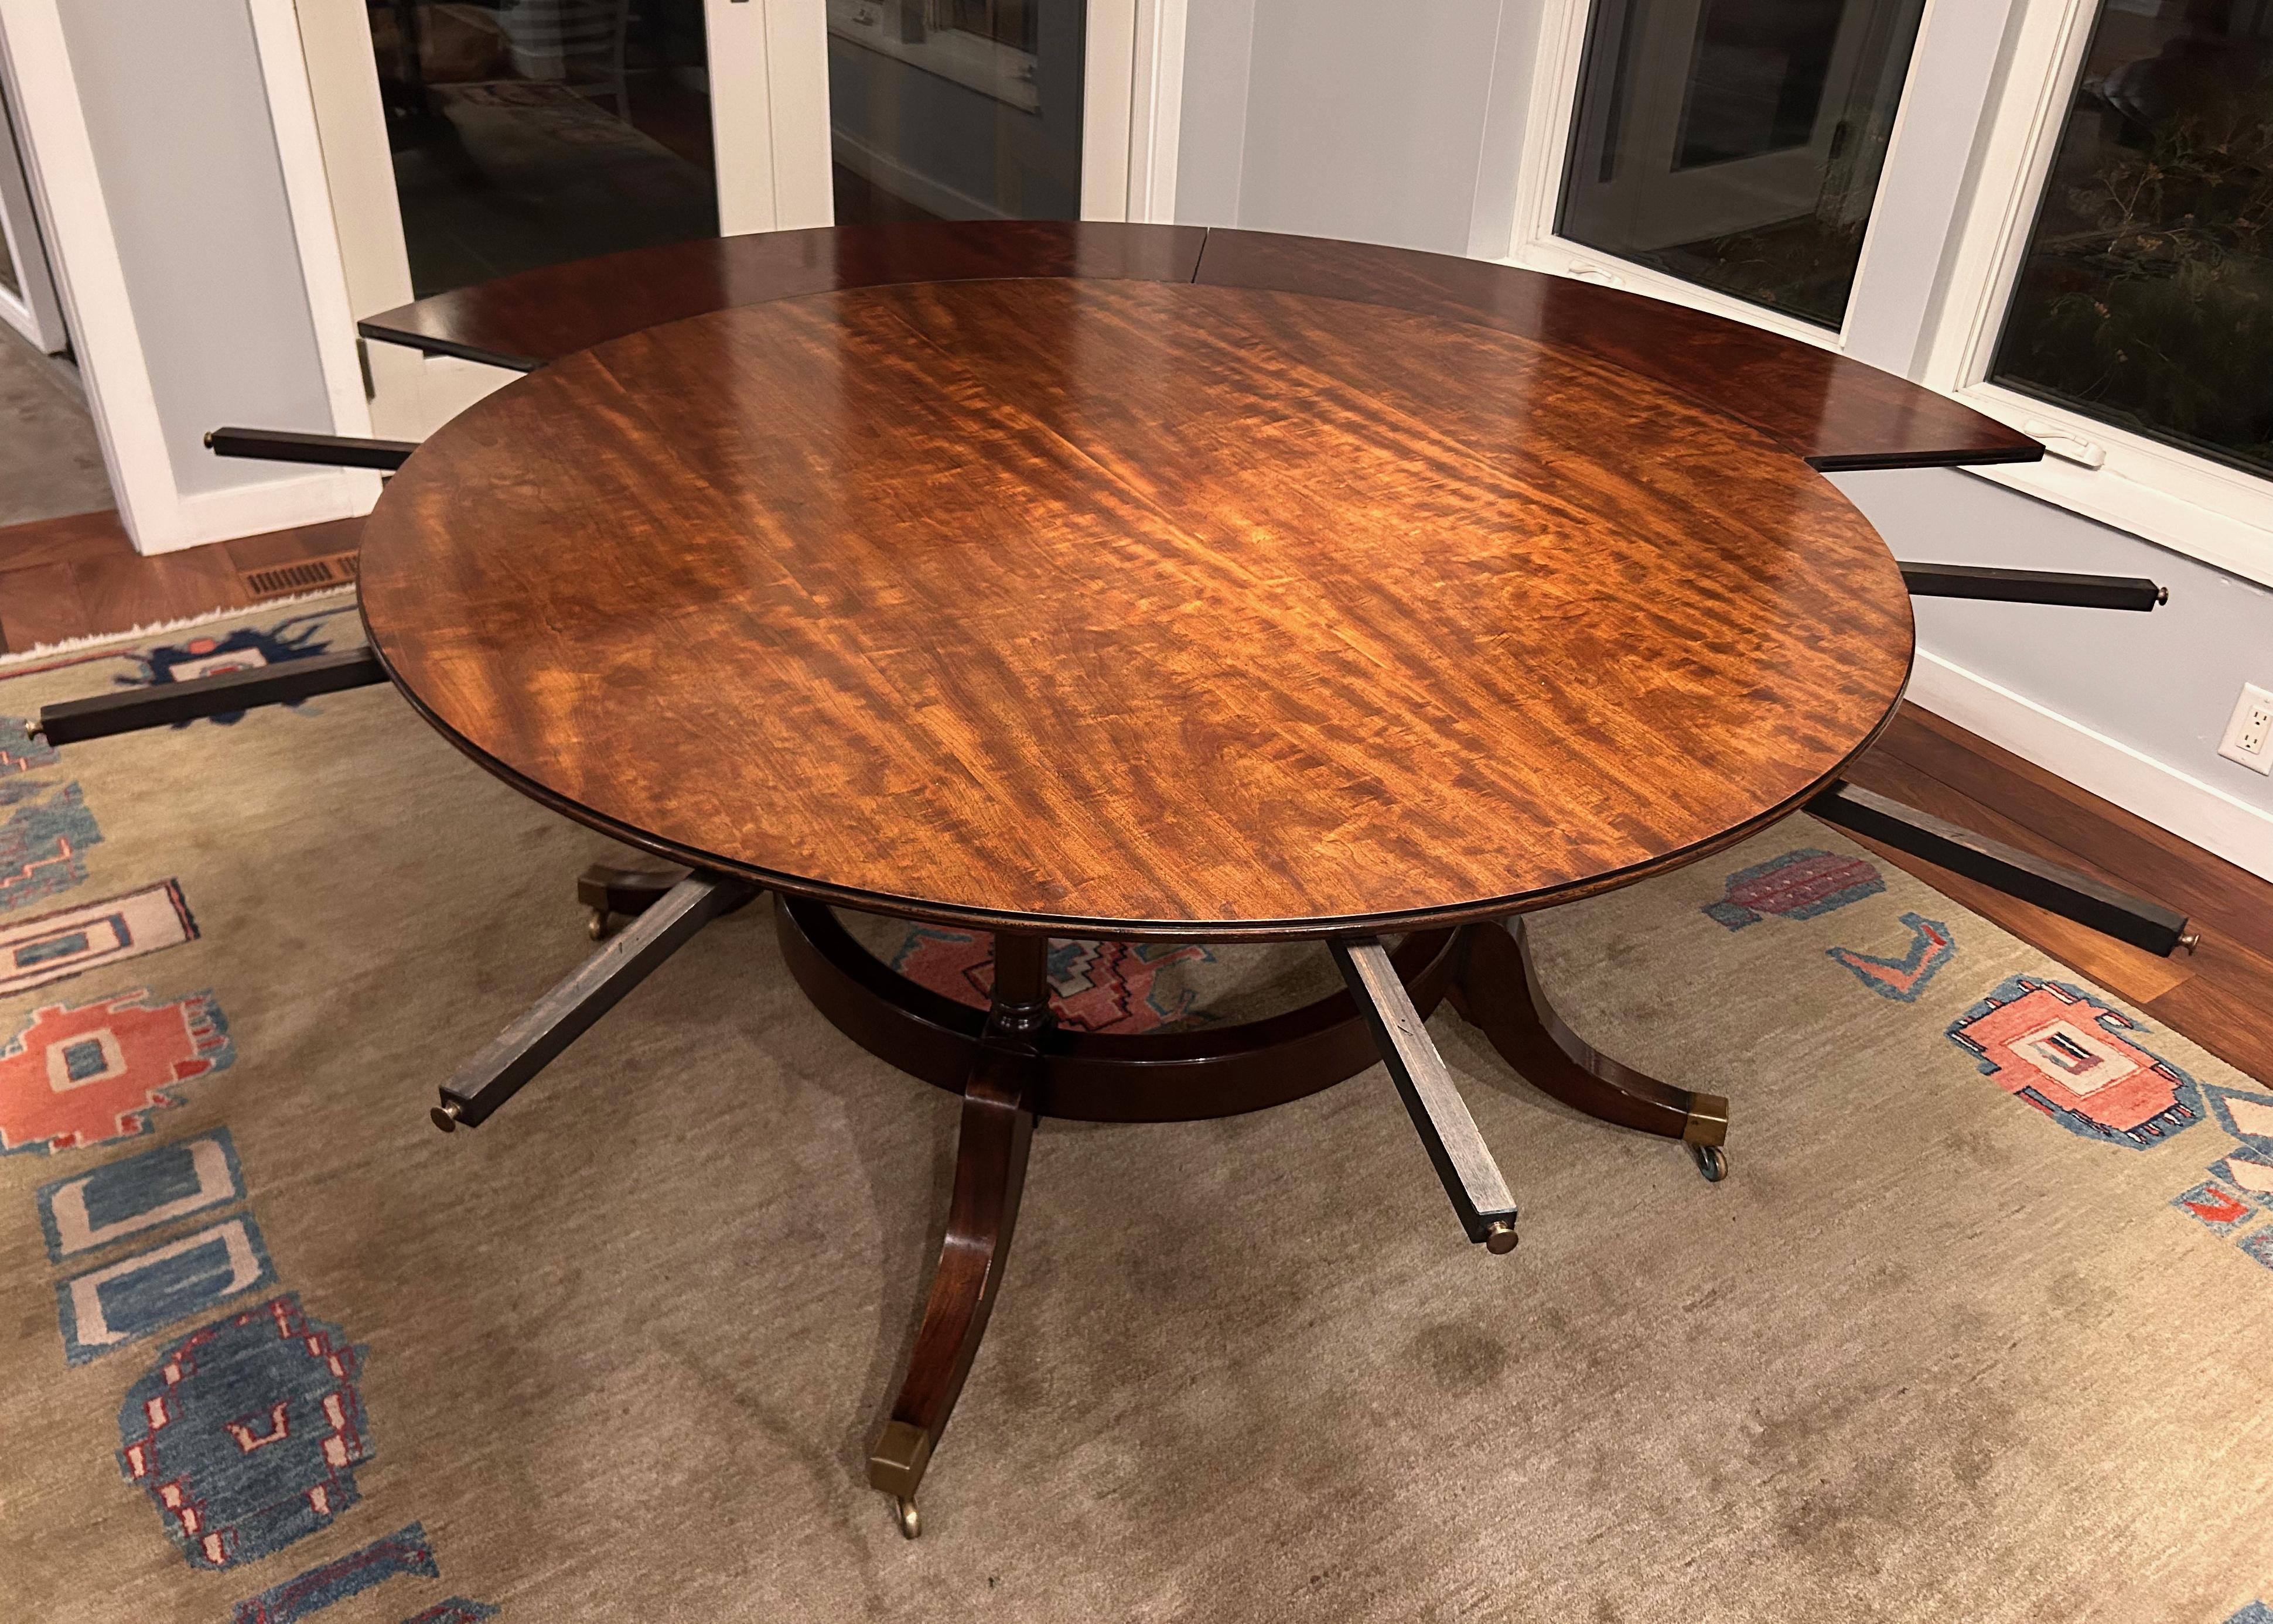 1940's Round Mahogany Veneer Dining Table with Crescent Leaves and Leaf Cabinet For Sale 2